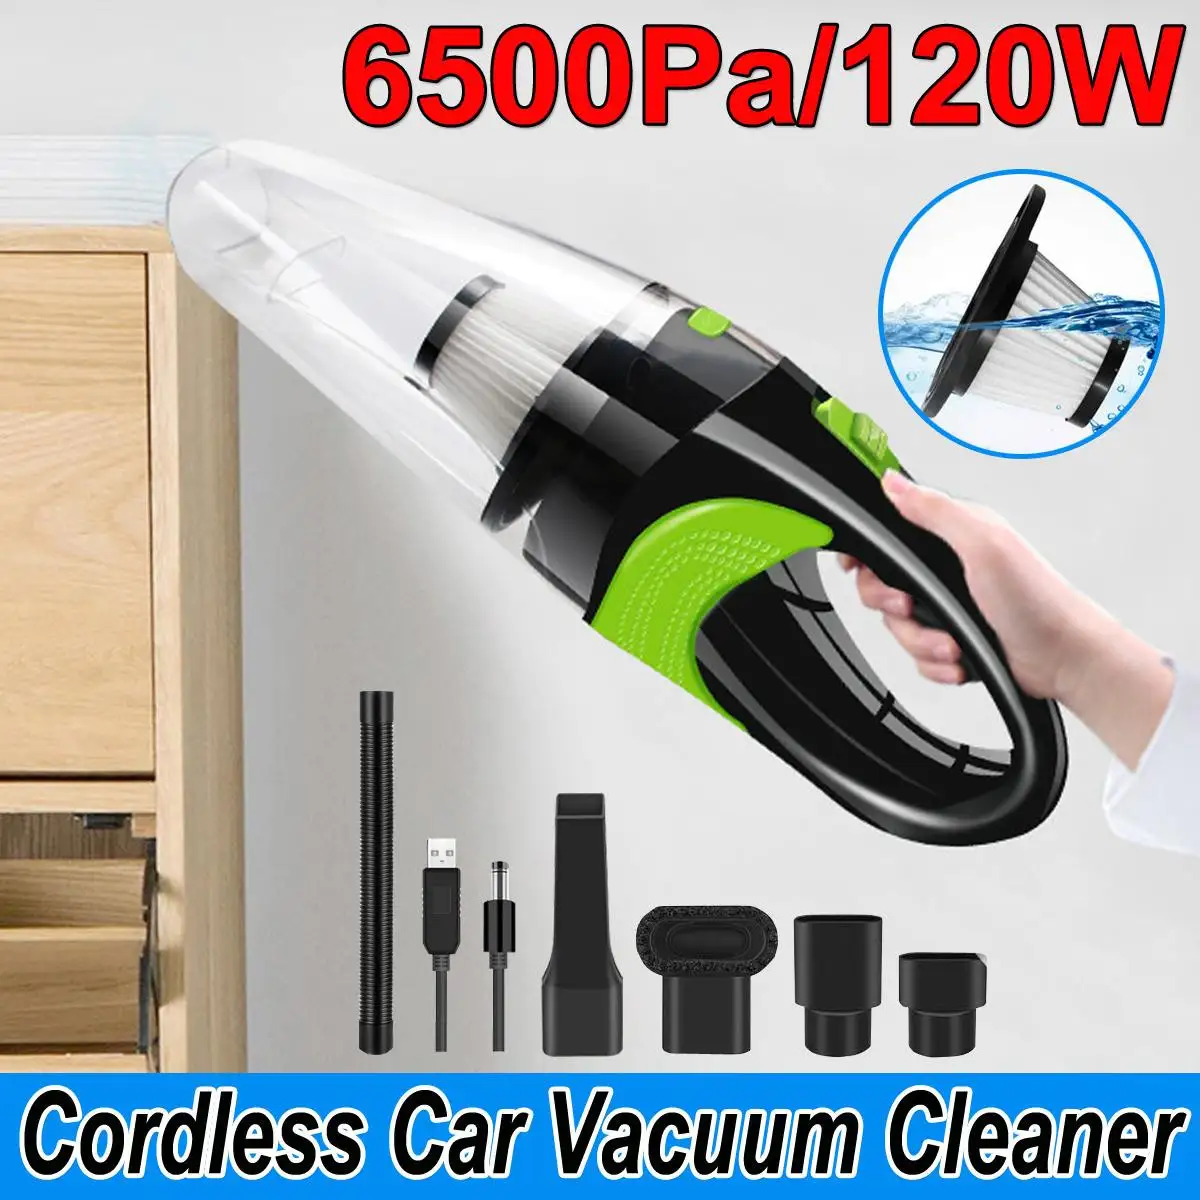 

Powerful 6500pa Car Vacuum Cleaner 120W Car Handheld Wet & Dry Dual Use Portable Vacuum Cleaners Auto for Home Office